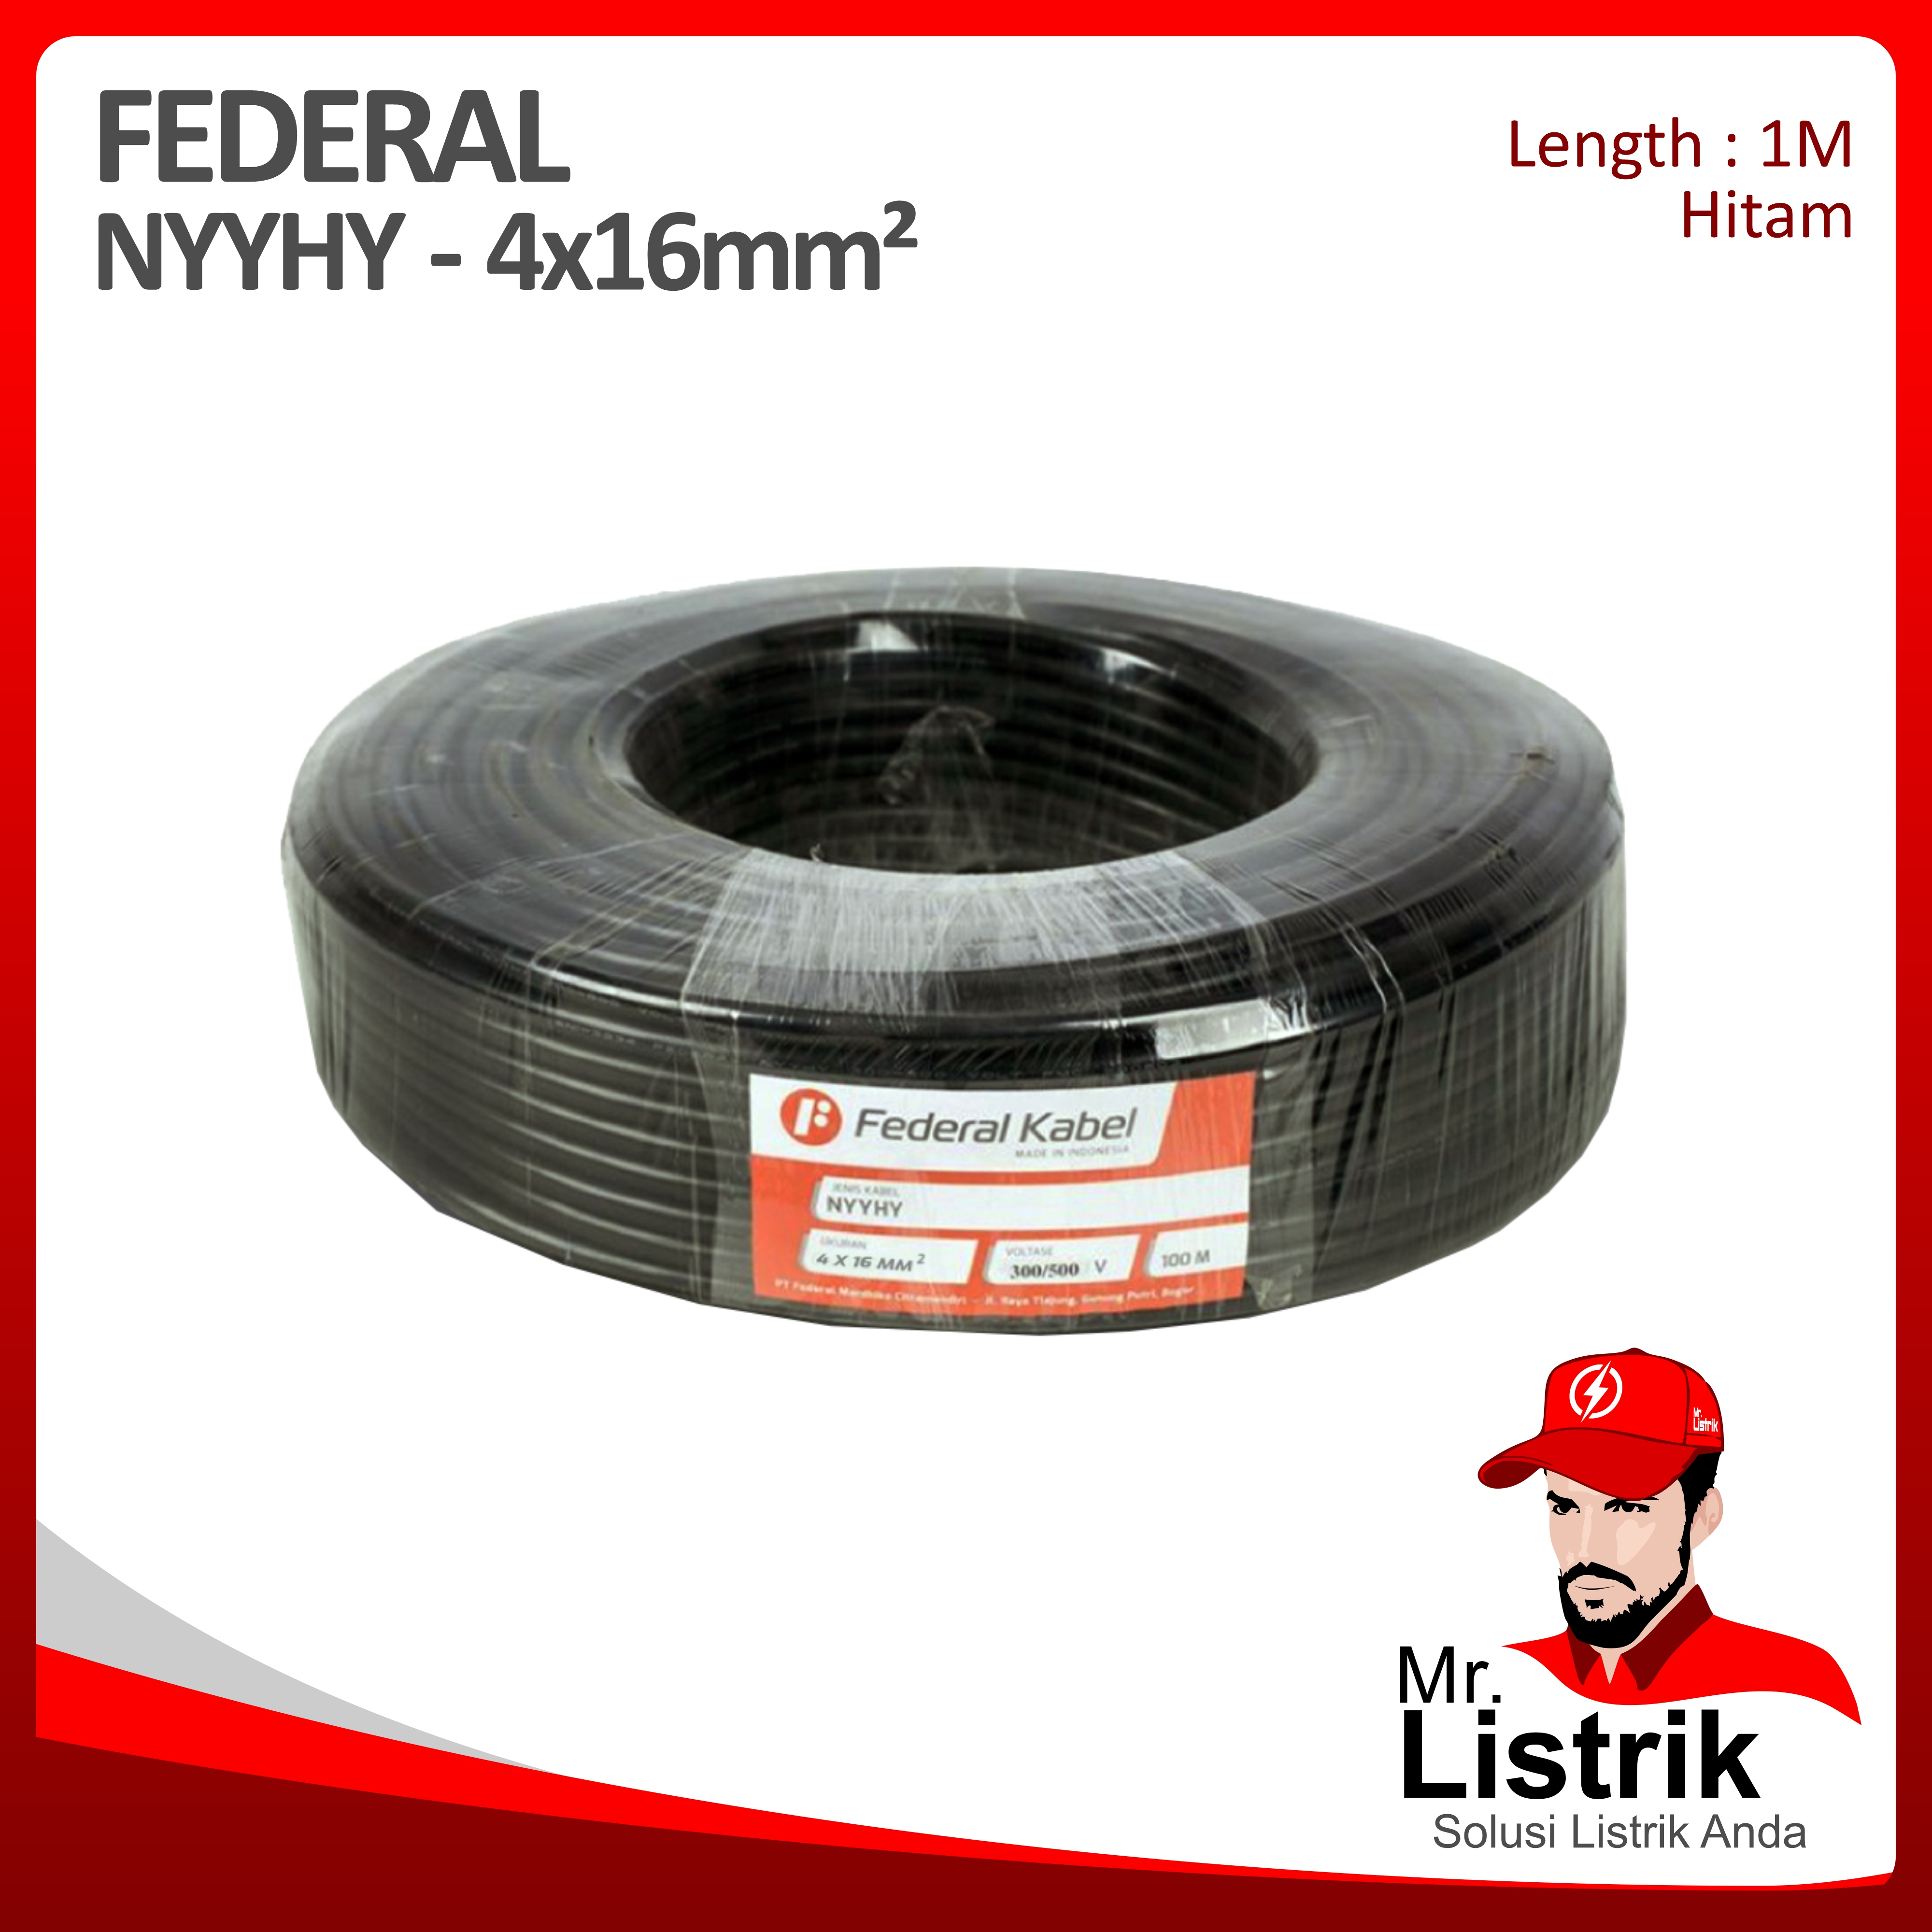 Kabel NYYHY Federal 4x16 mm² @1 Mtr